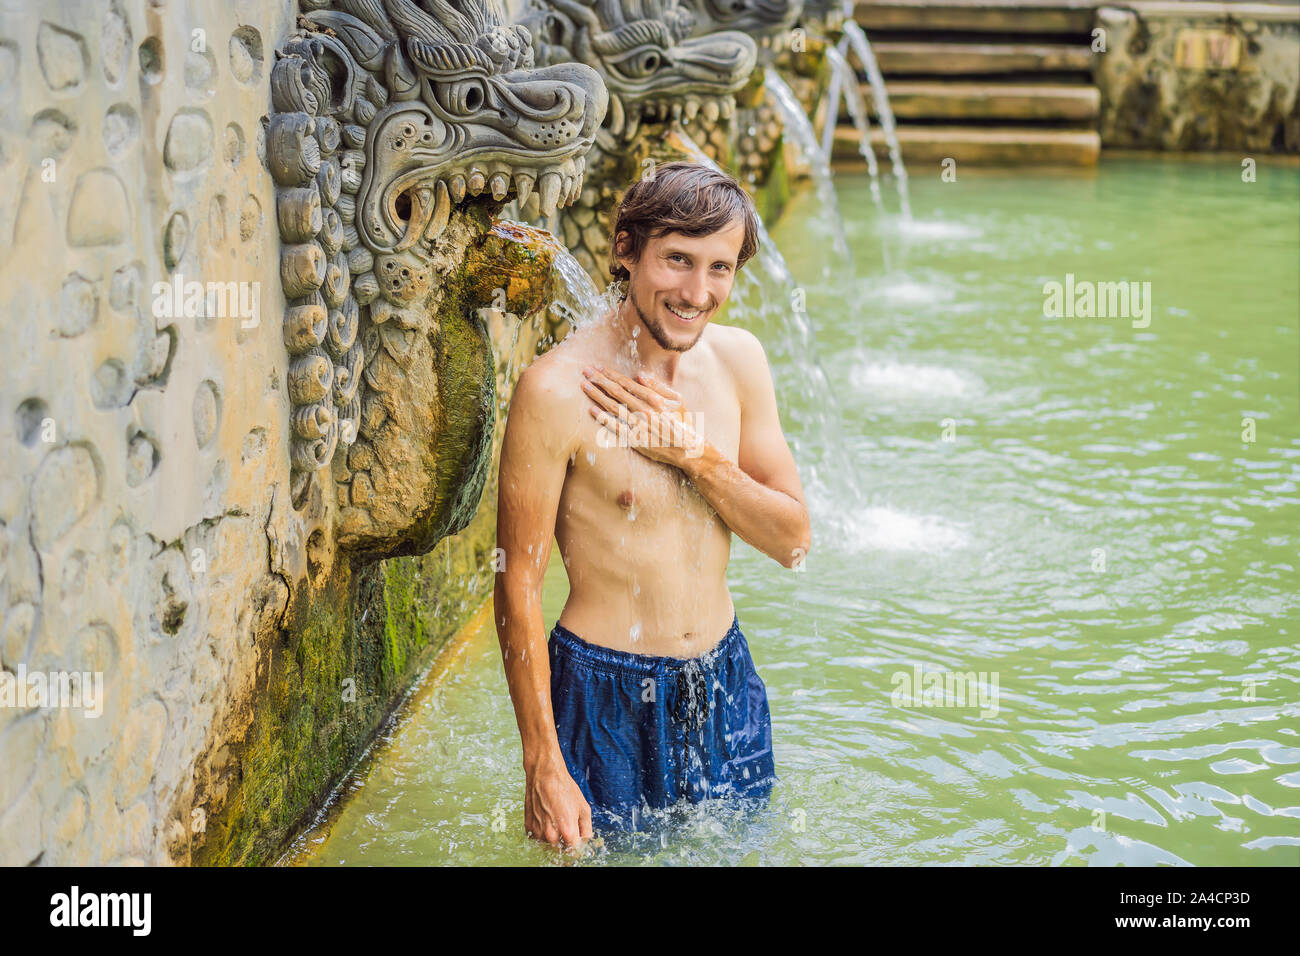 Young man in hot springs banjar. Thermal water is released from the mouth of statues at a hot springs in Banjar, Bali, Indonesia Stock Photo